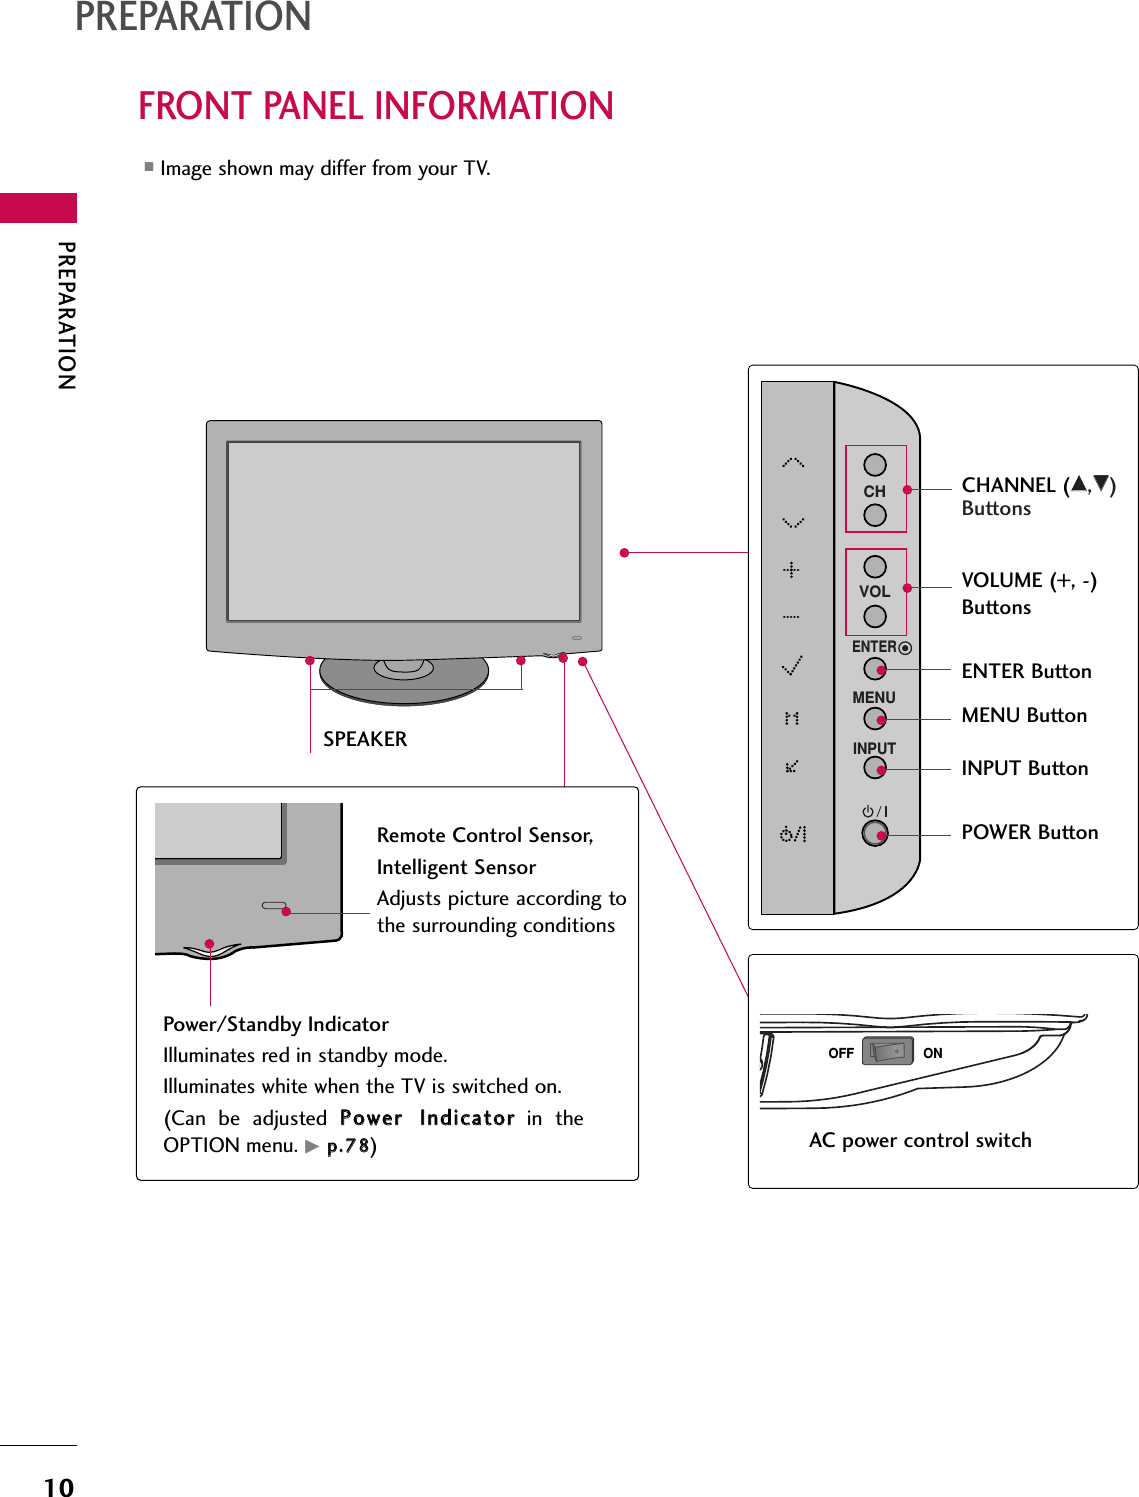 PREPARATION10FRONT PANEL INFORMATIONPREPARATION■Image shown may differ from your TV.INPUTMENUENTERCHVOLCHANNEL (DD,EE)ButtonsVOLUME (+, -) ButtonsENTER ButtonMENU ButtonINPUT ButtonPOWER ButtonAC power control switchOFF ONSPEAKERPower/Standby IndicatorIlluminates red in standby mode.Illuminates white when the TV is switched on.(Can  be  adjusted  PPoowweerr  IInnddiiccaattoorrin  theOPTION menu. GGpp..7788)Remote Control Sensor,Intelligent SensorAdjusts picture according tothe surrounding conditions 